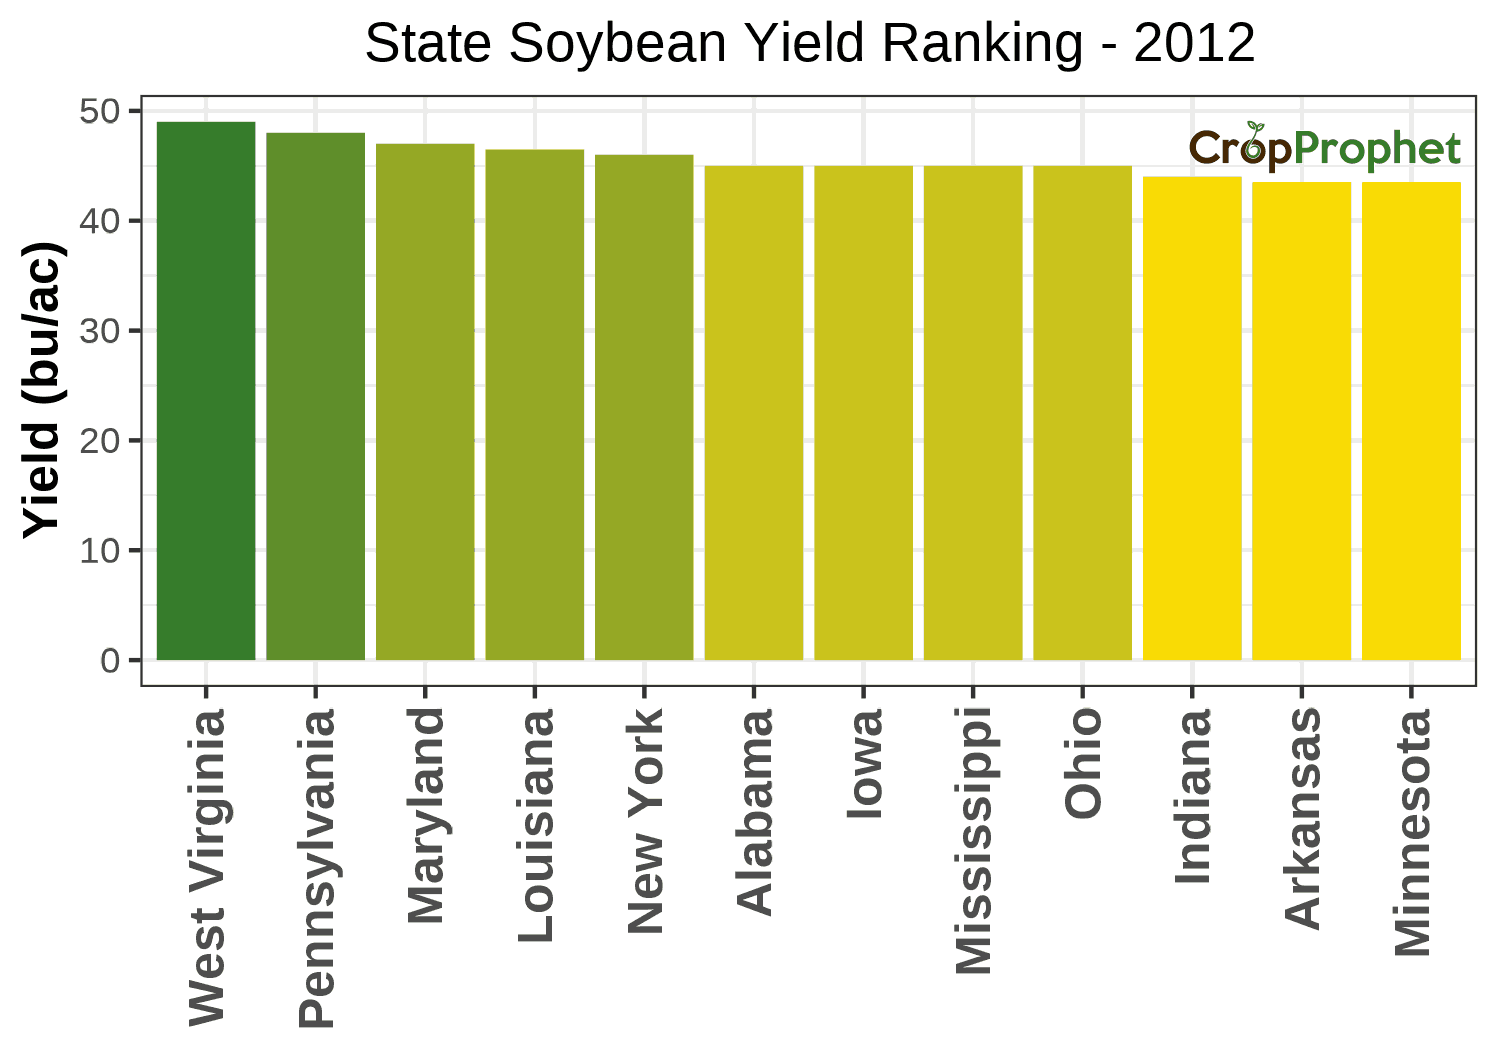 Soybean Production by State - 2012 Rankings